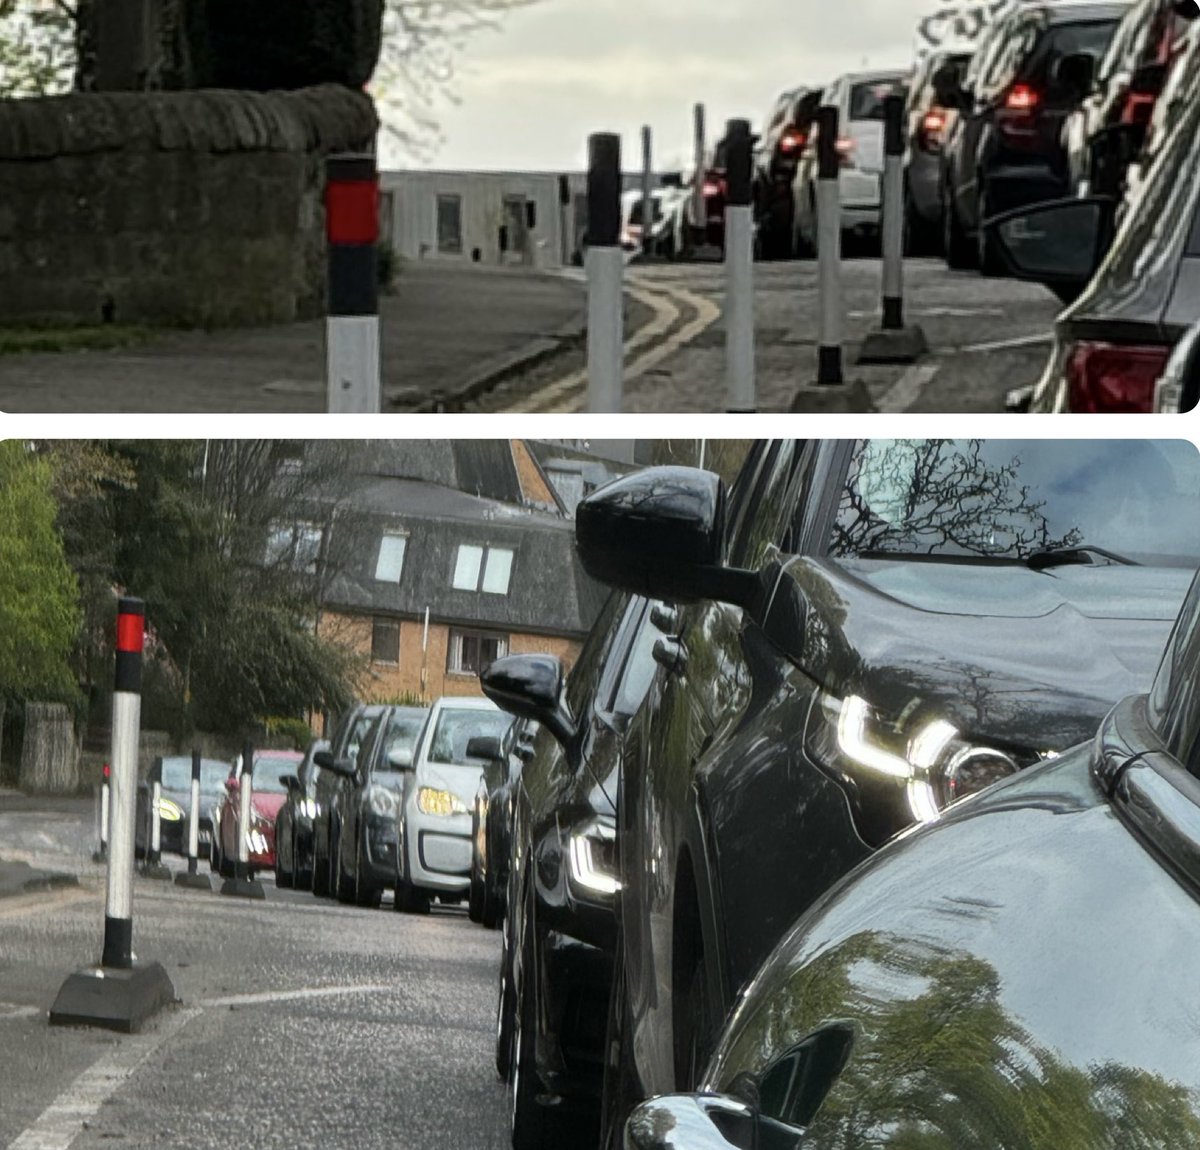 Displaced traffic on Ladywell Road, Corstorphine at 17:39hrs today. Queue stretched from lights @ Meadow Place Road junction back to Corst High Street